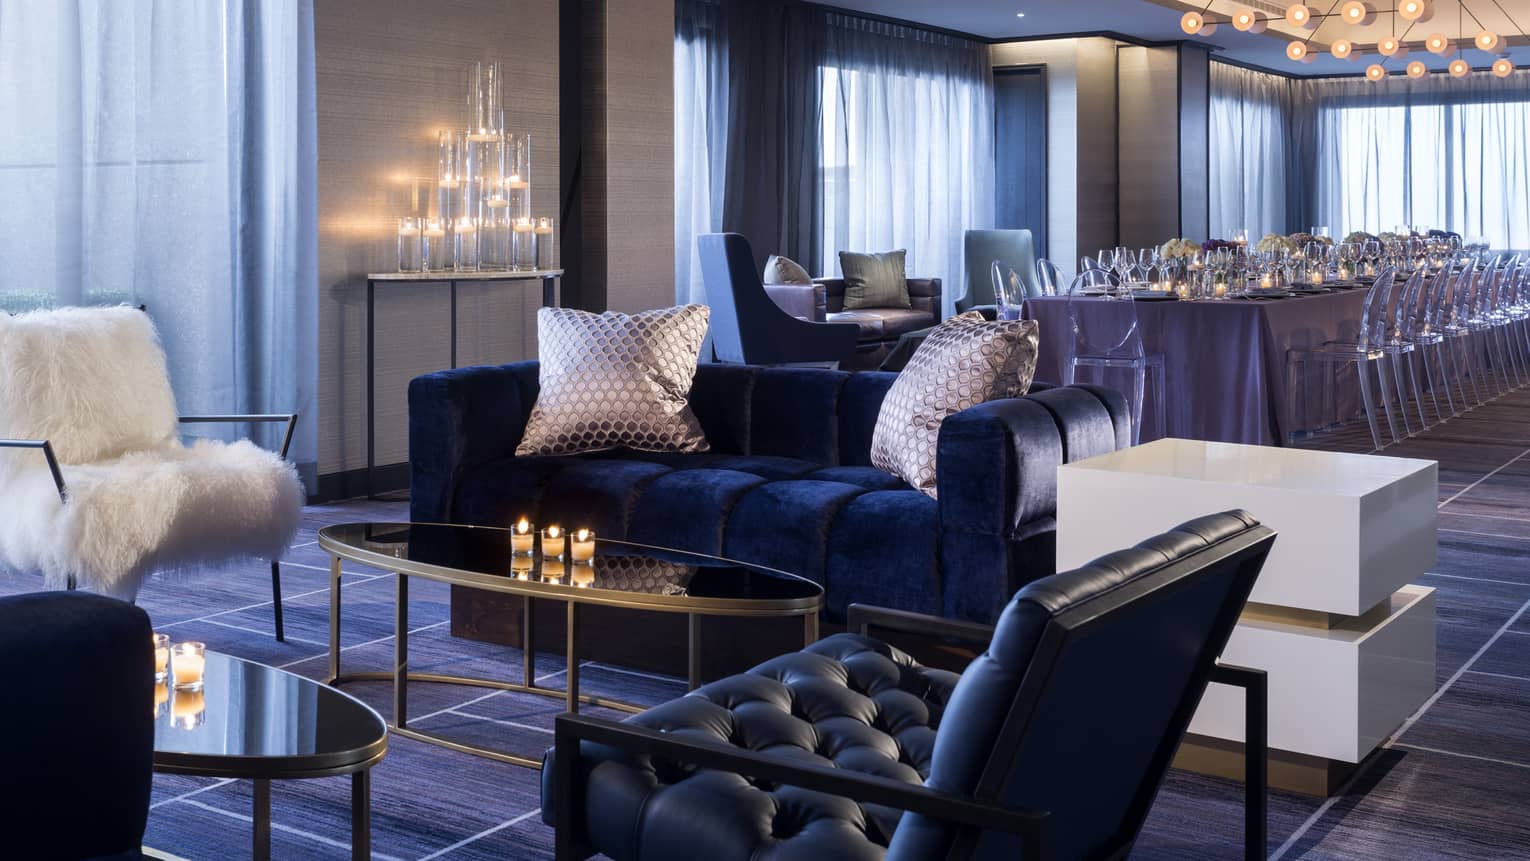 Penthouse seating area with blue velvet sofa, white faux fur chair by candles, long private dining table